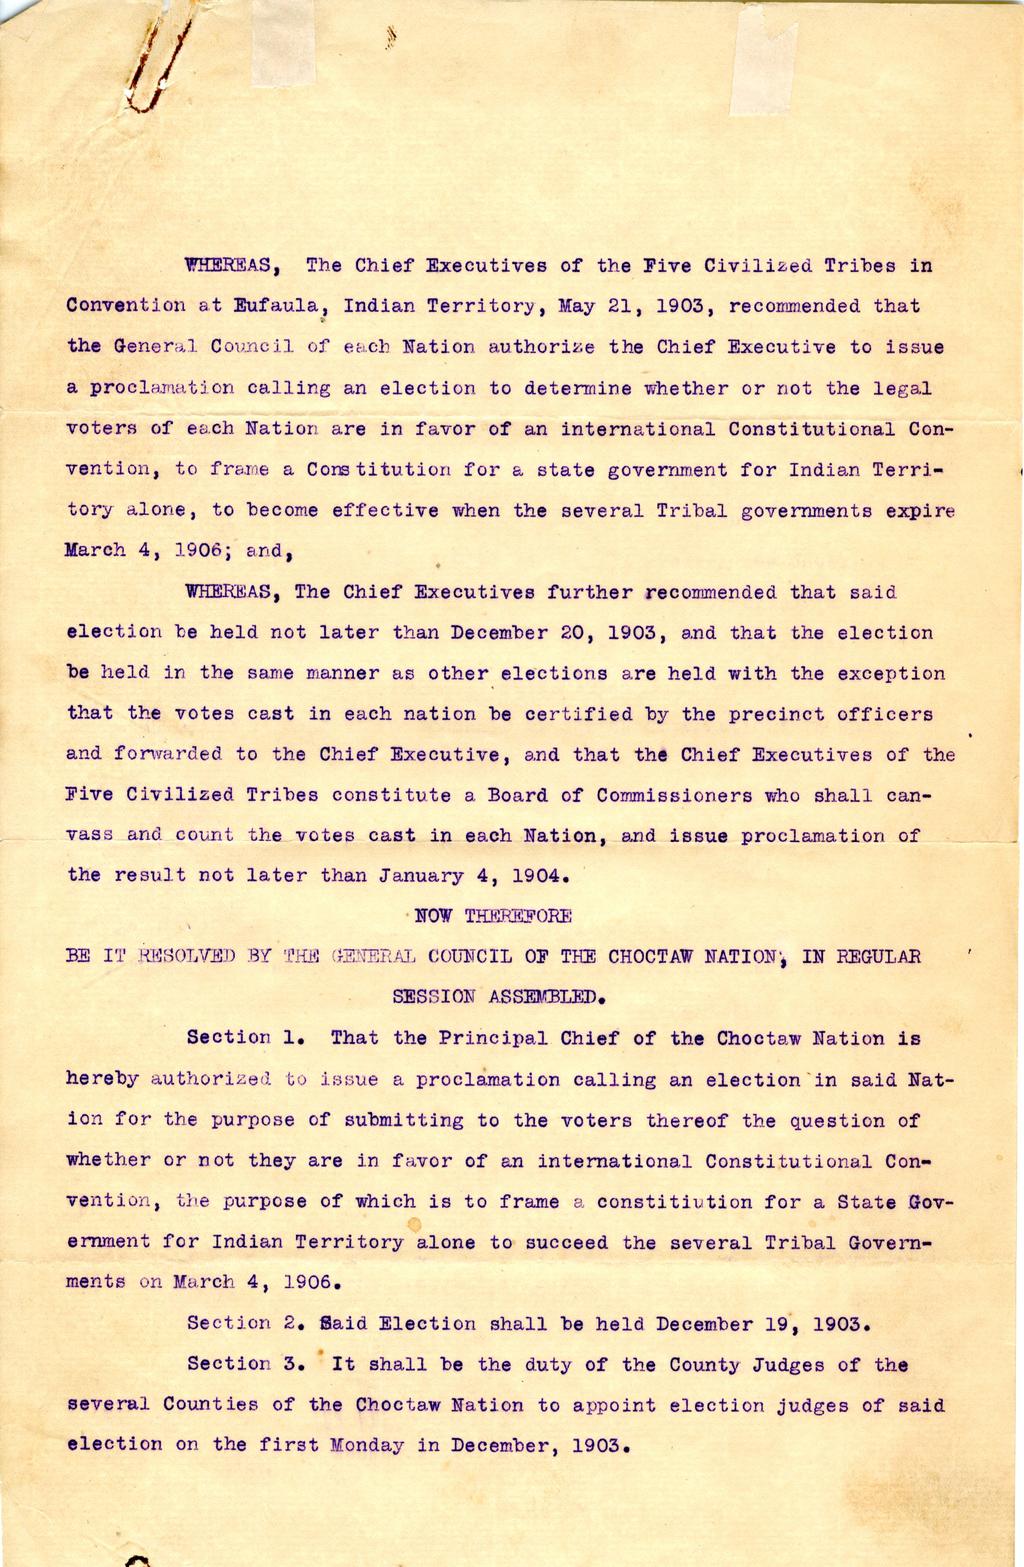 a WHEREAS, The Chief Executives of the Five Civilized Tibes in Convention at Eufaula, Indian Teitoy, May 21, 1903, ecommended that» the Geneal Council of each Nation authoize the Chief Executive to